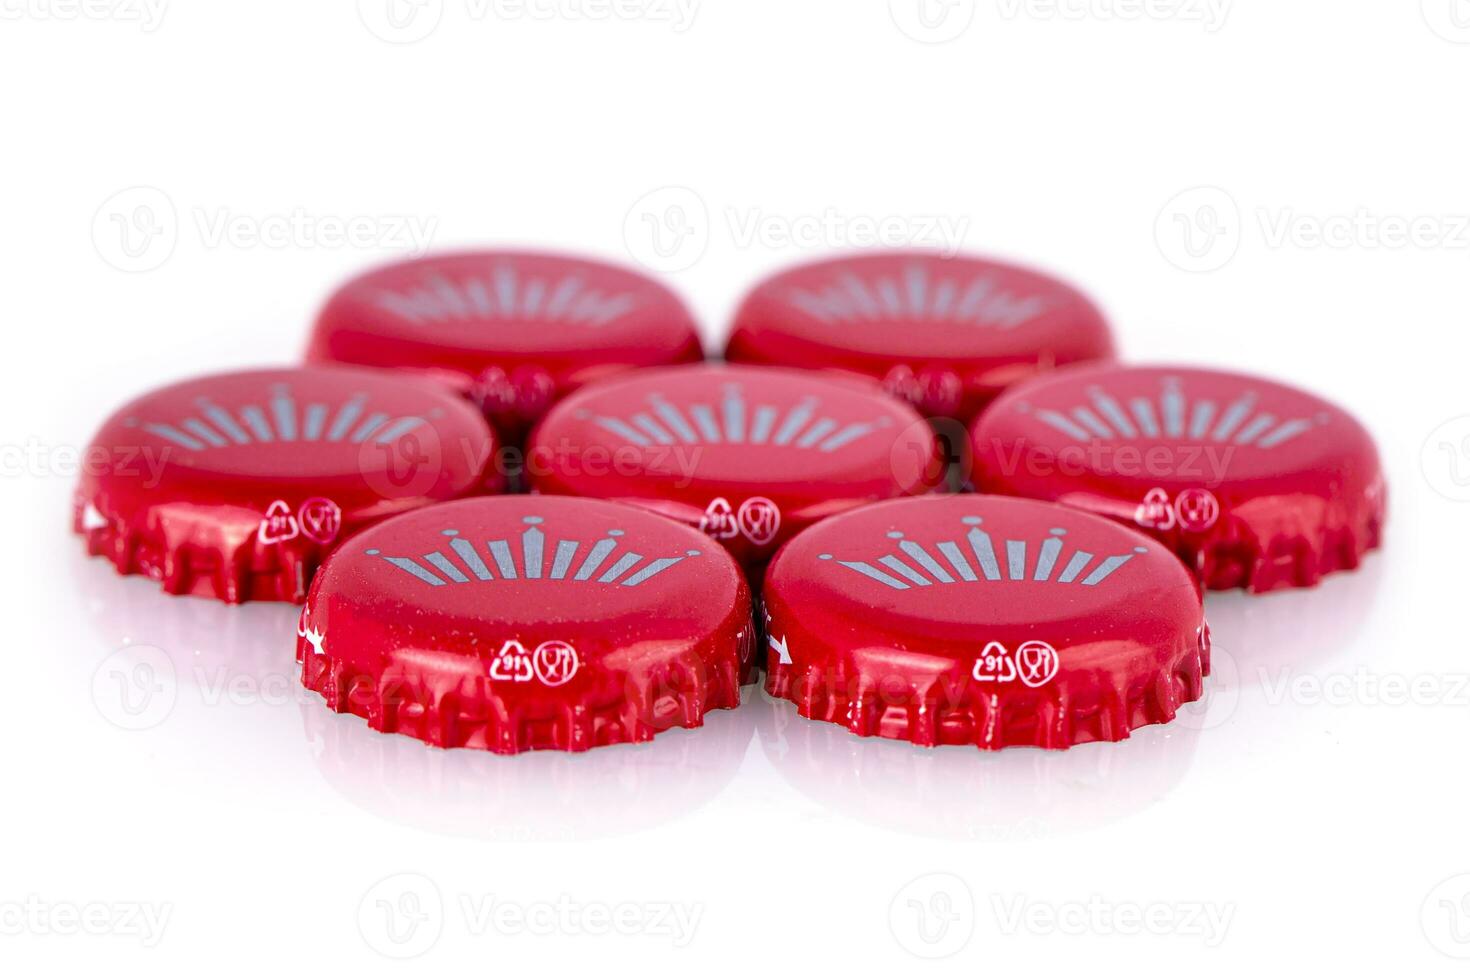 The Red beer caps Bud isolated on white photo